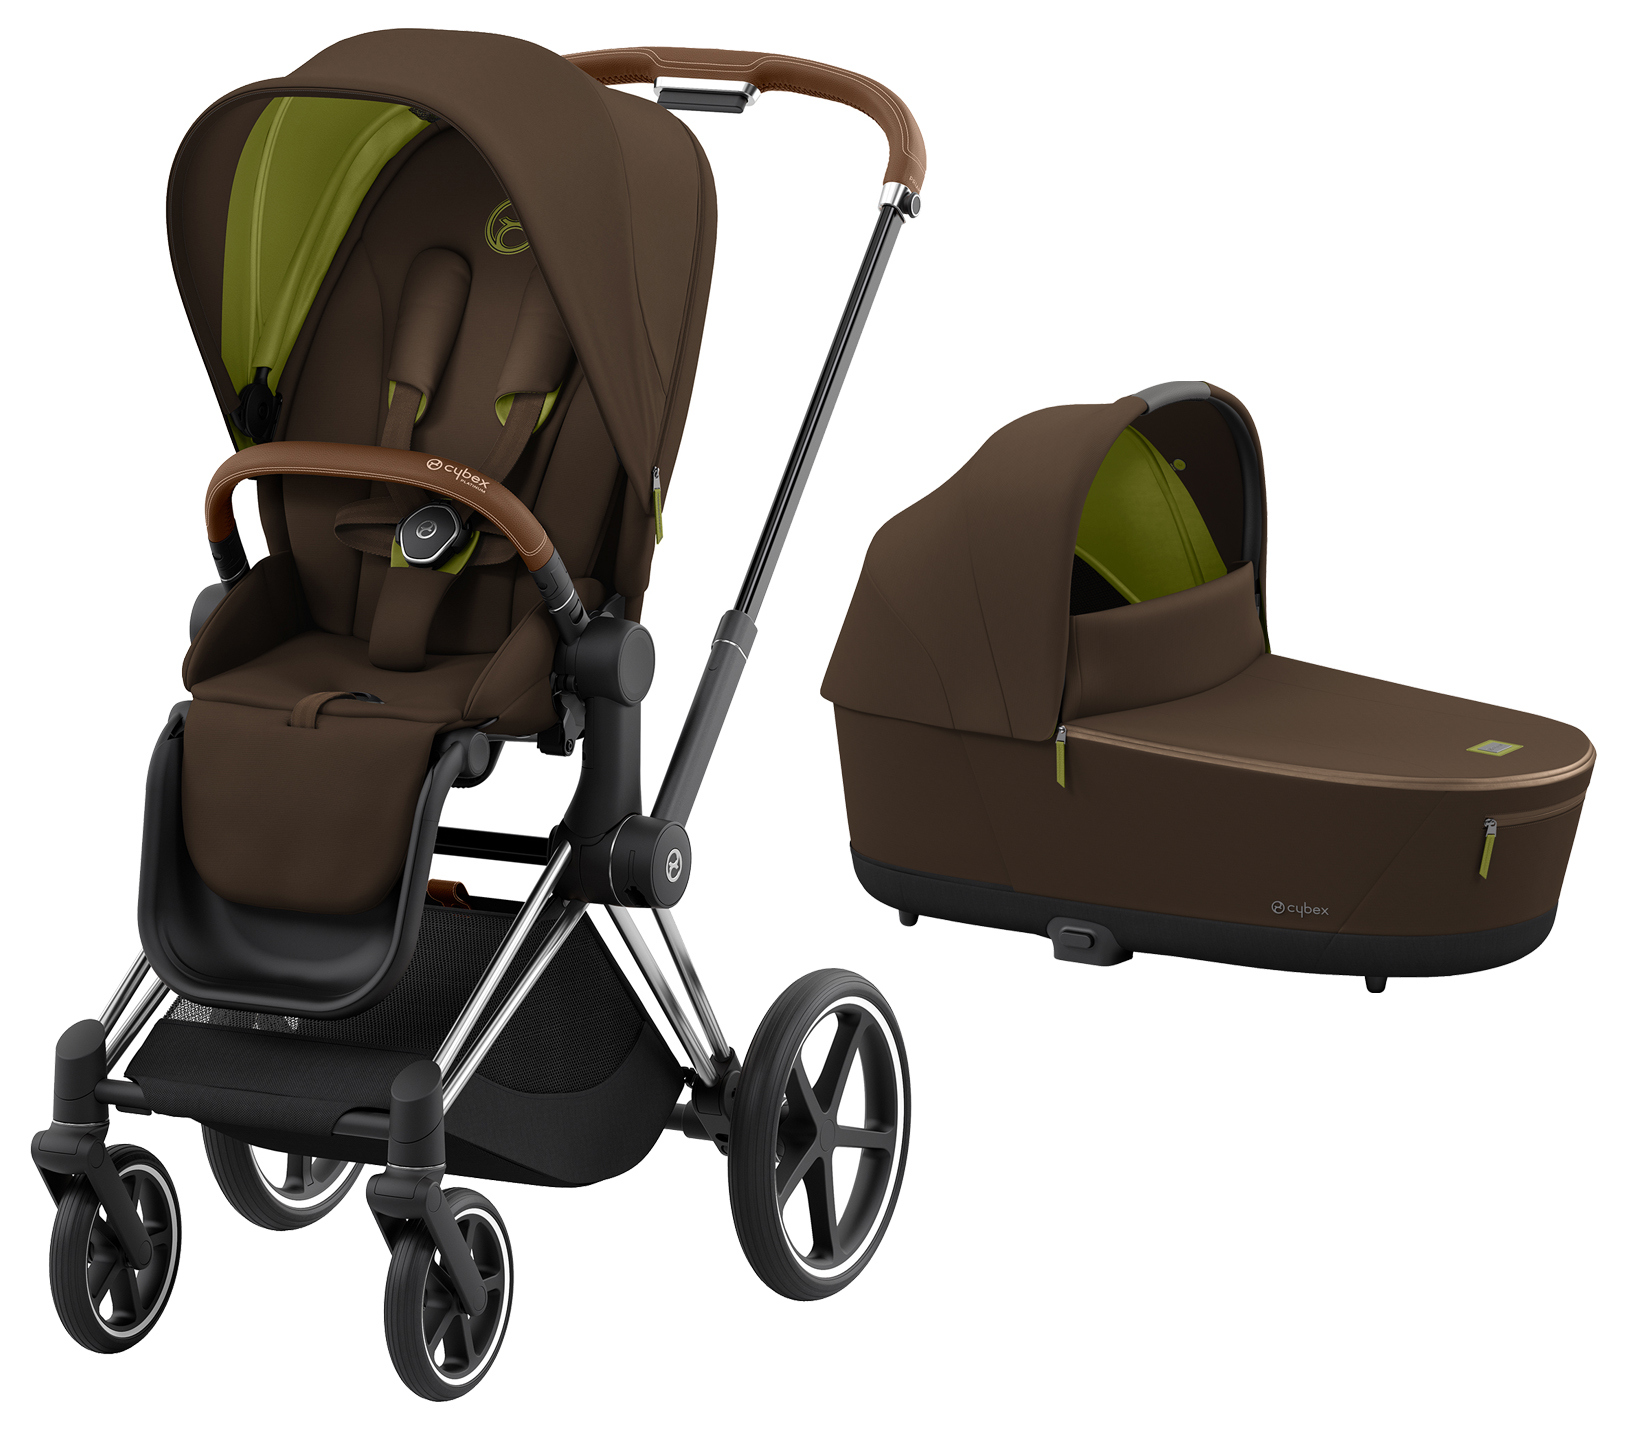 Cybex Priam Duovagn ChrBrown/KhakiGreen